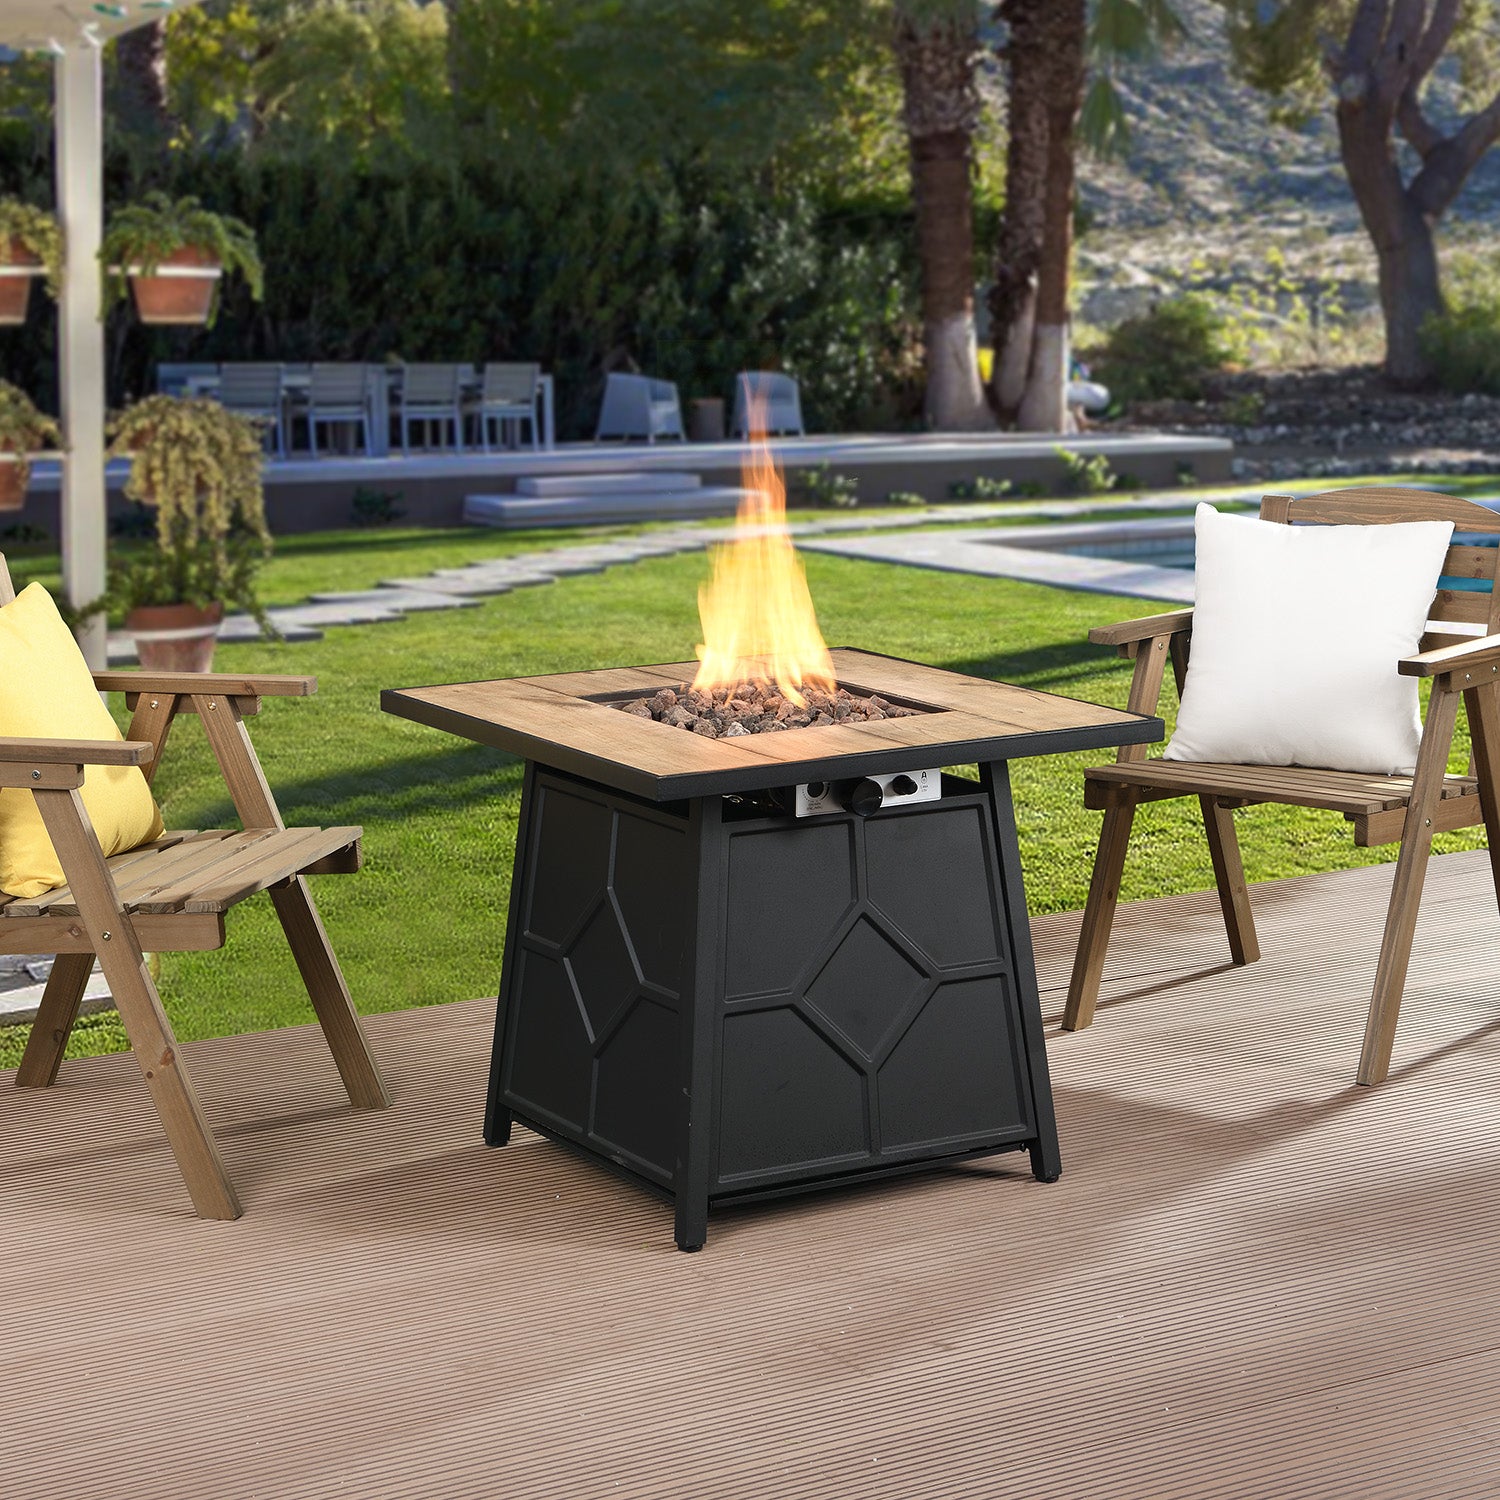 Brown Fire Pit Table, 30-inch Square 40,000 BTU Auto-Ignition Propane Gas Firepit with Waterproof Cover-Boyel Living